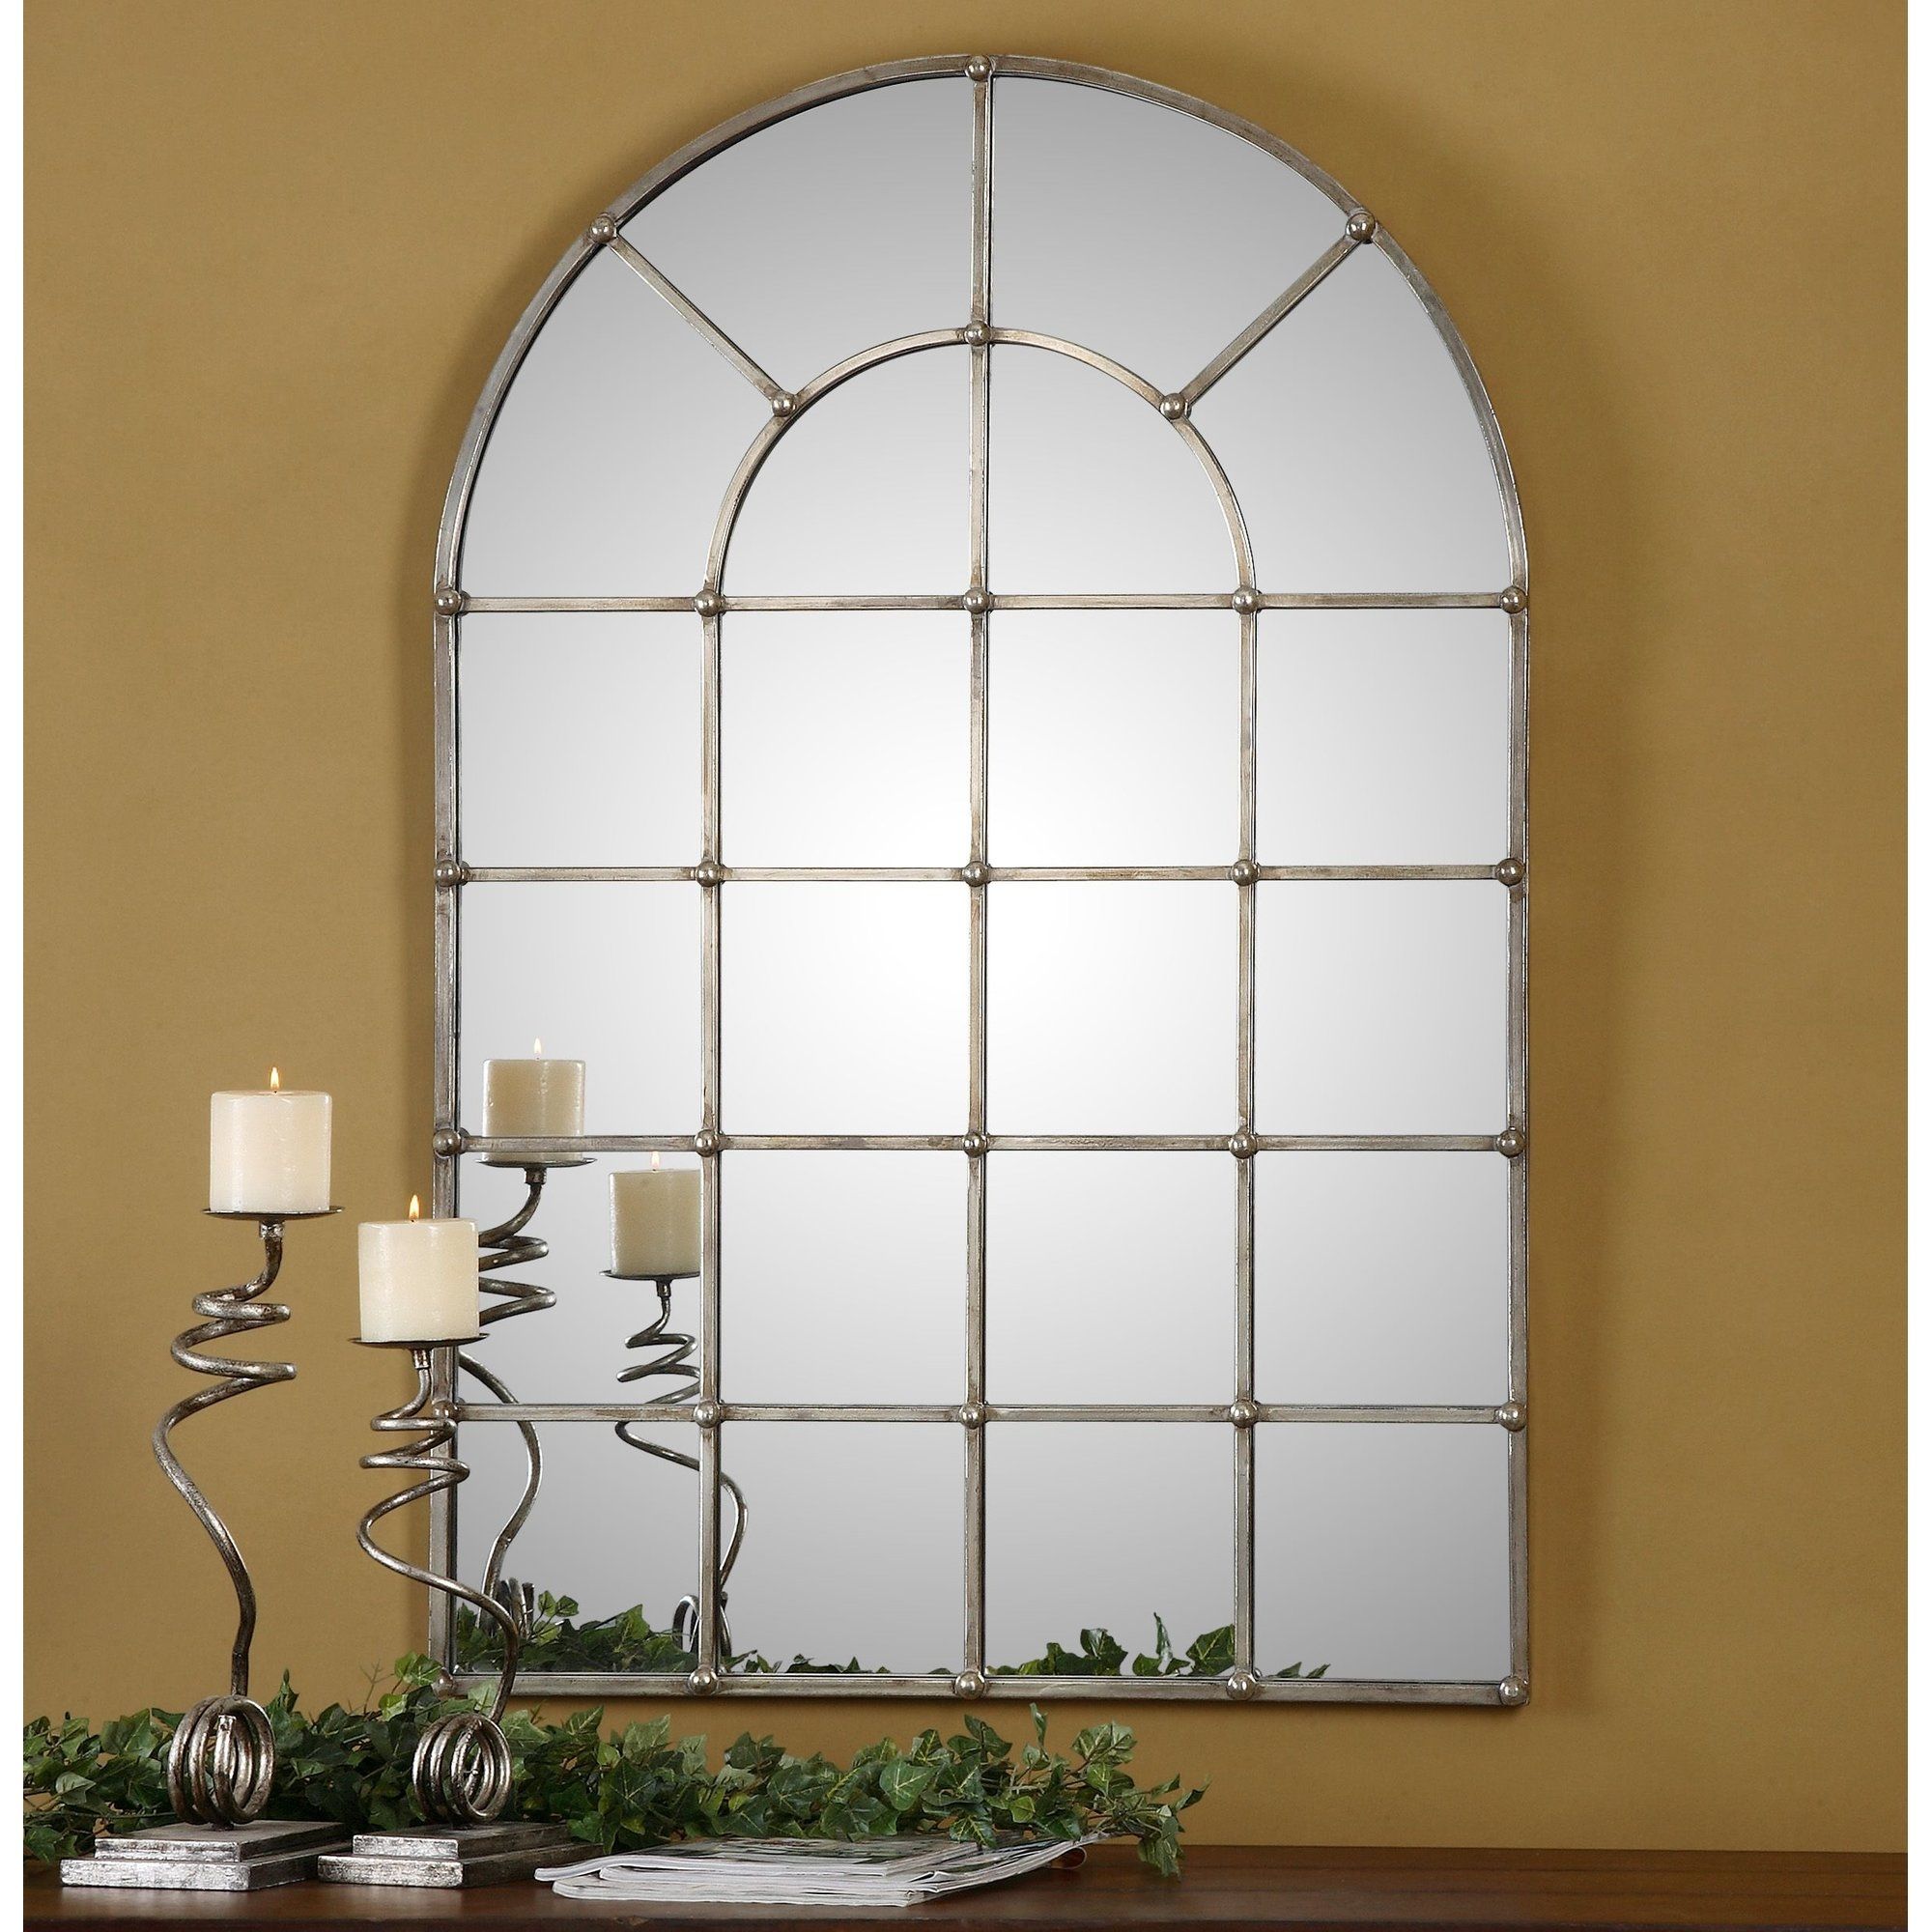 Joanne Arched Oversized Wall Mirror Reviews Joss Main Within Arched Wall Mirrors (View 6 of 15)